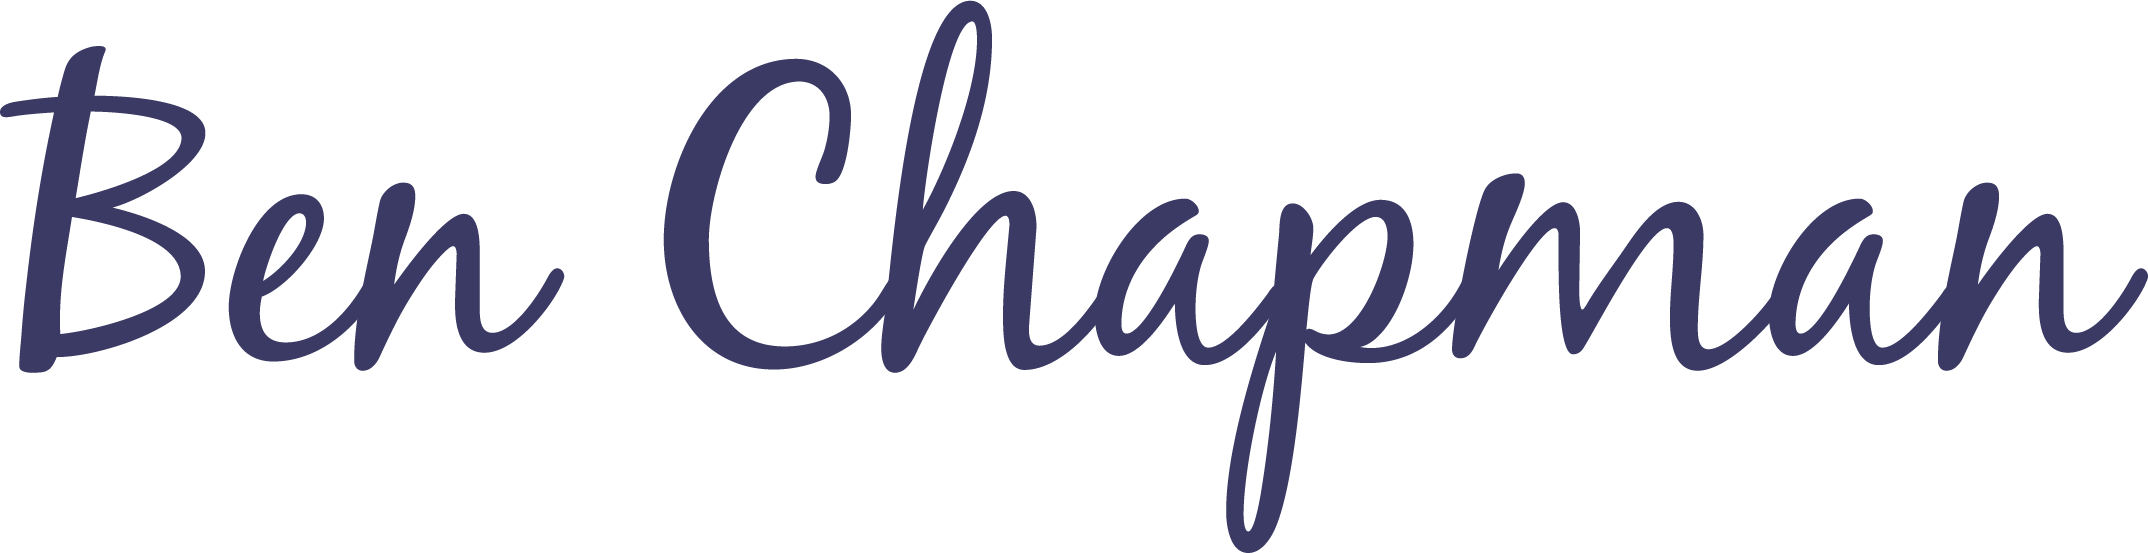 Ben Chapman Counselling and Psychotherapy